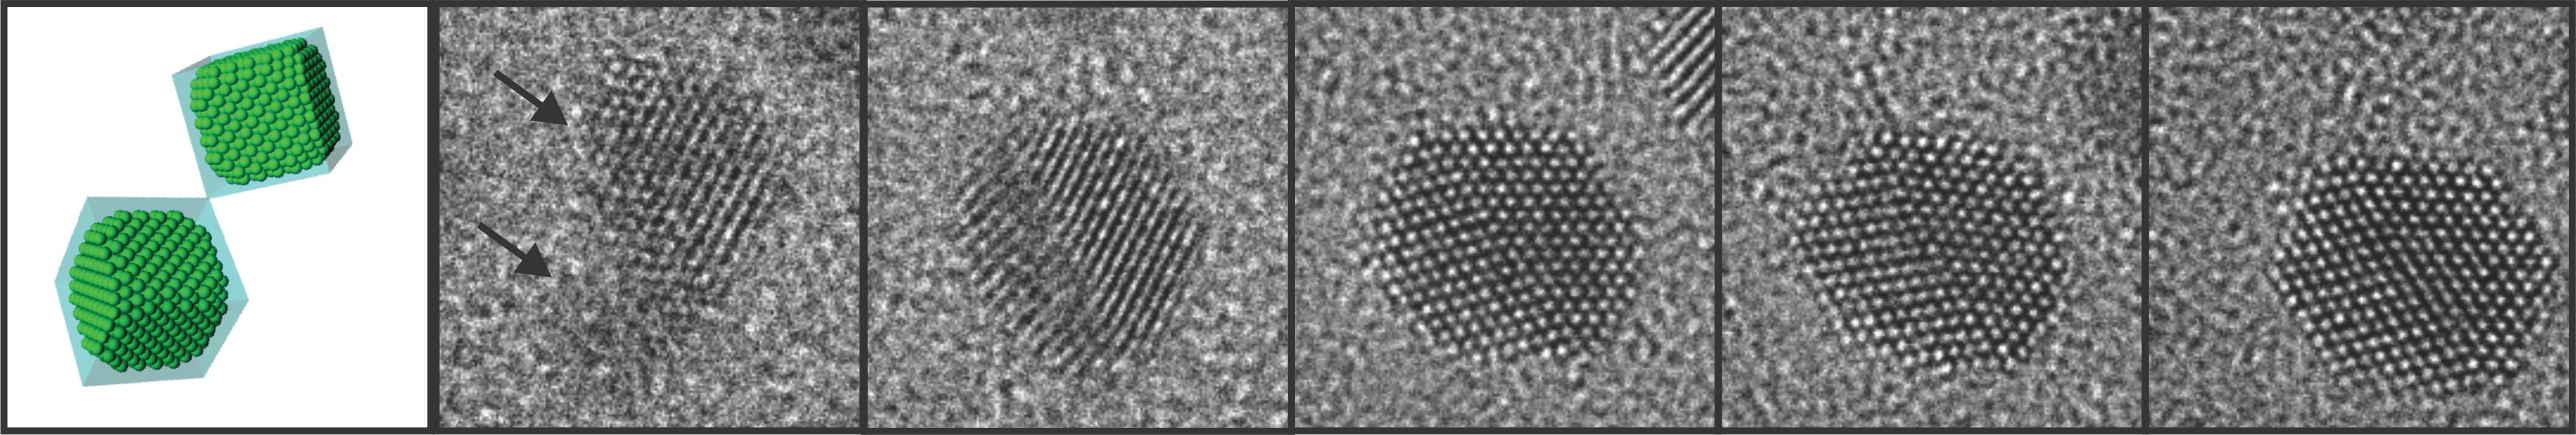 High-resolution Atomic Imaging of Specimens in Liquid Observed by Transmission Electron Microscopes Using Graphene Liquid Cells 이미지